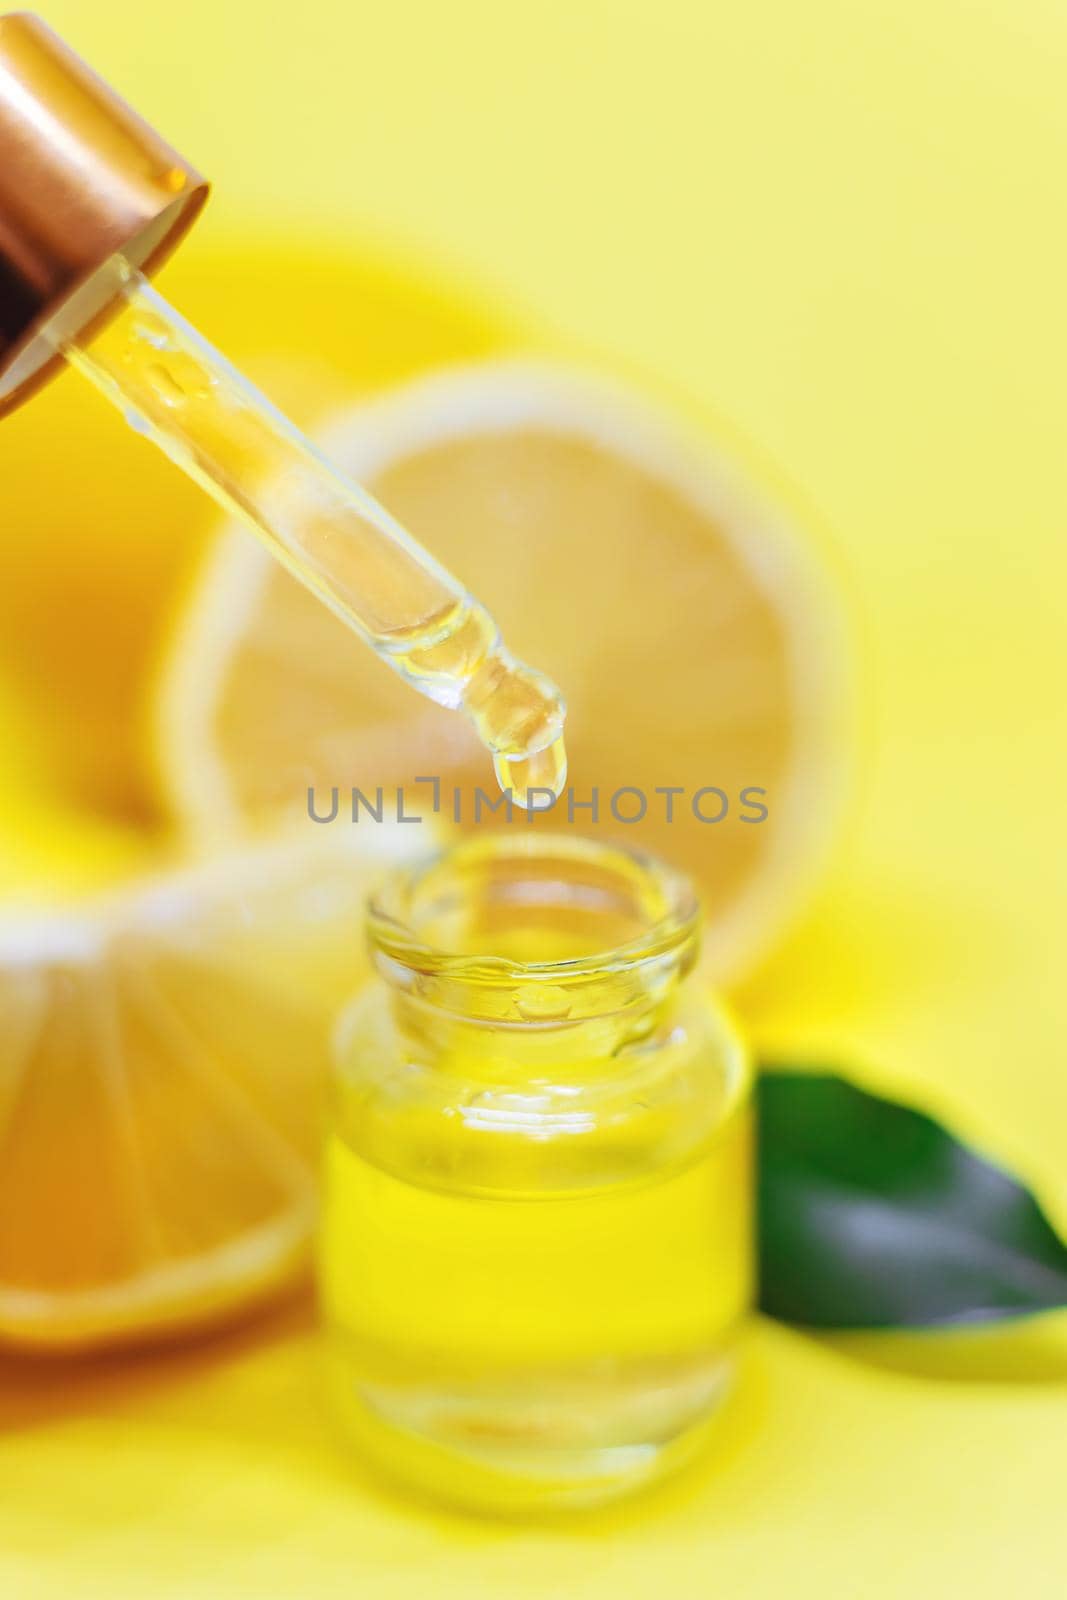 lemon essential oil on a yellow background. Selective focus.nature